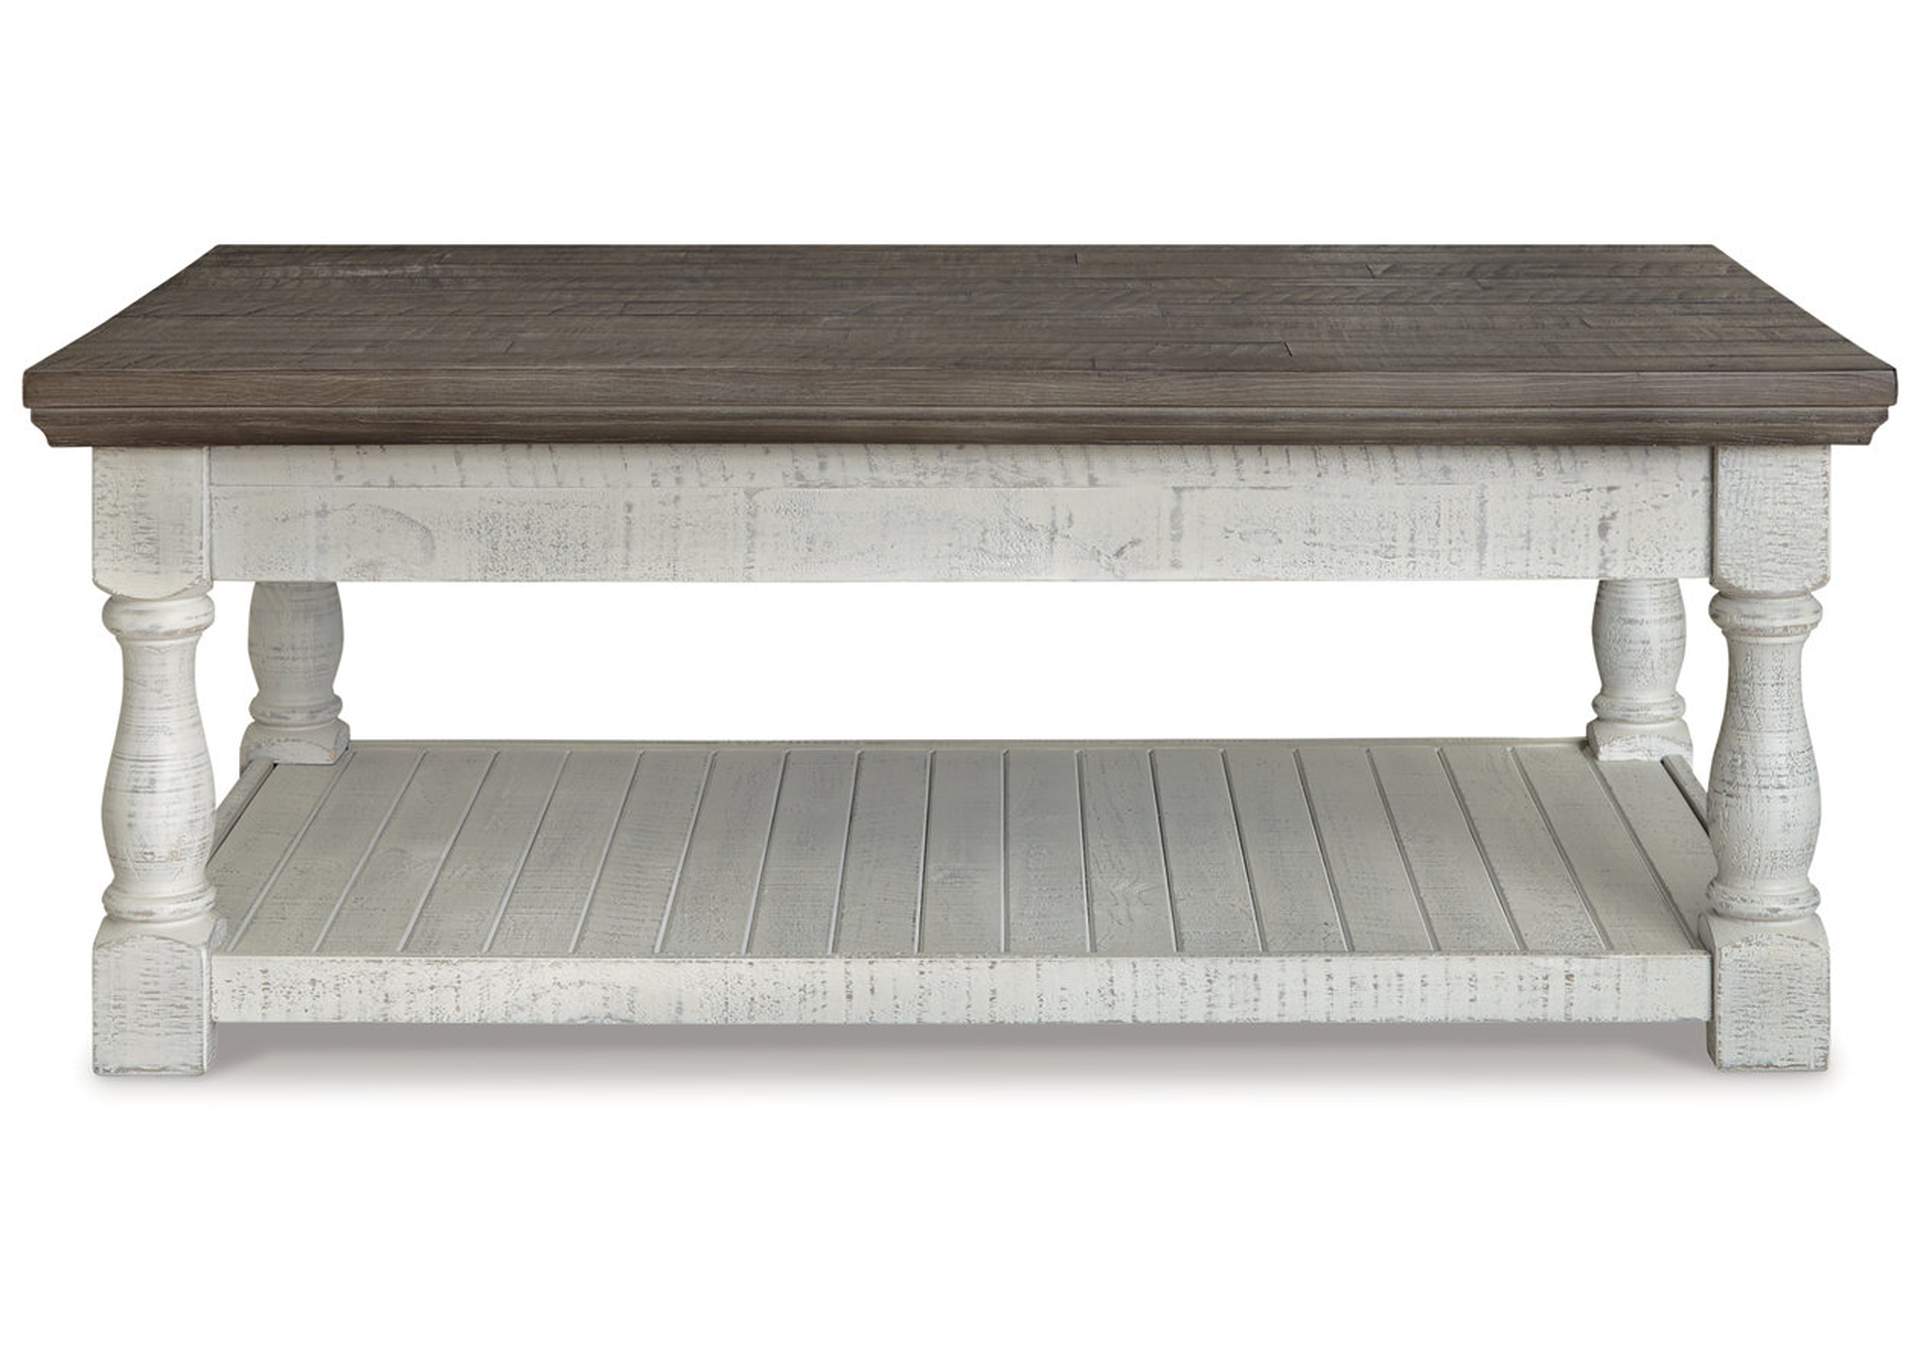 Havalance Lift-Top Coffee Table,Signature Design By Ashley